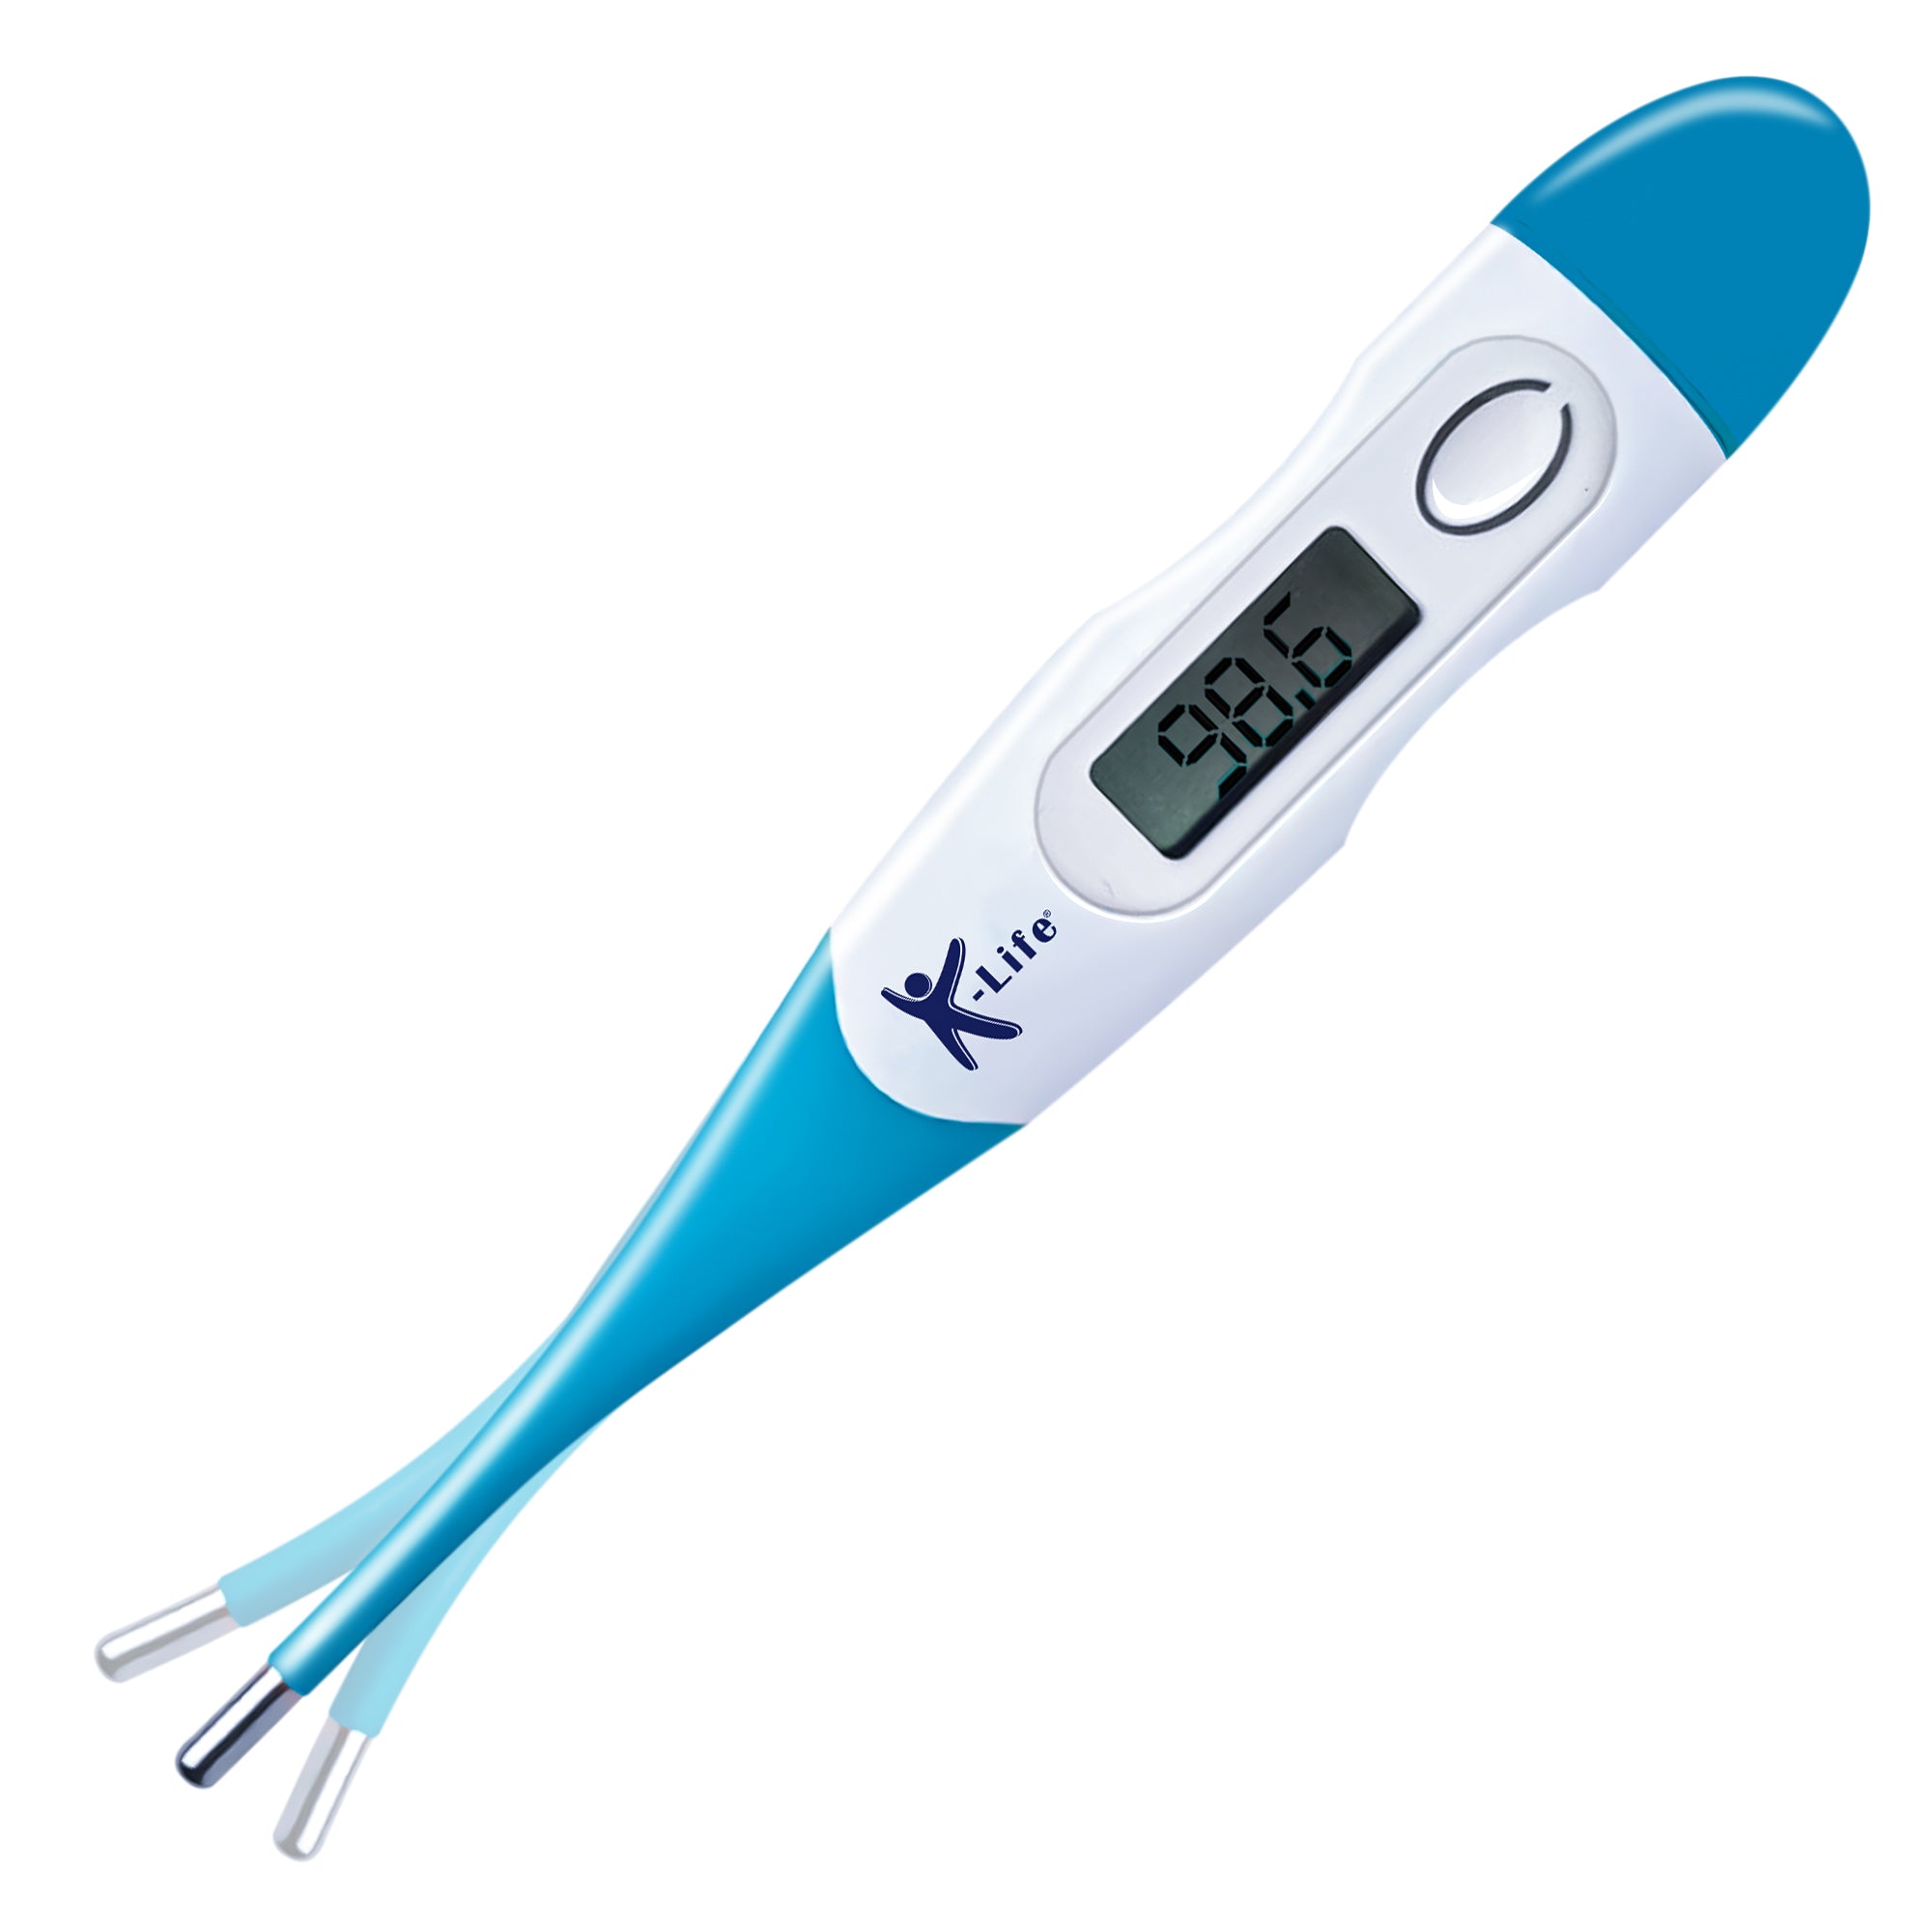 K-life FDT-101 Flexible Tip Digital Fever Check Machine for Kids Adults & Babies Thermometer (White Blue)